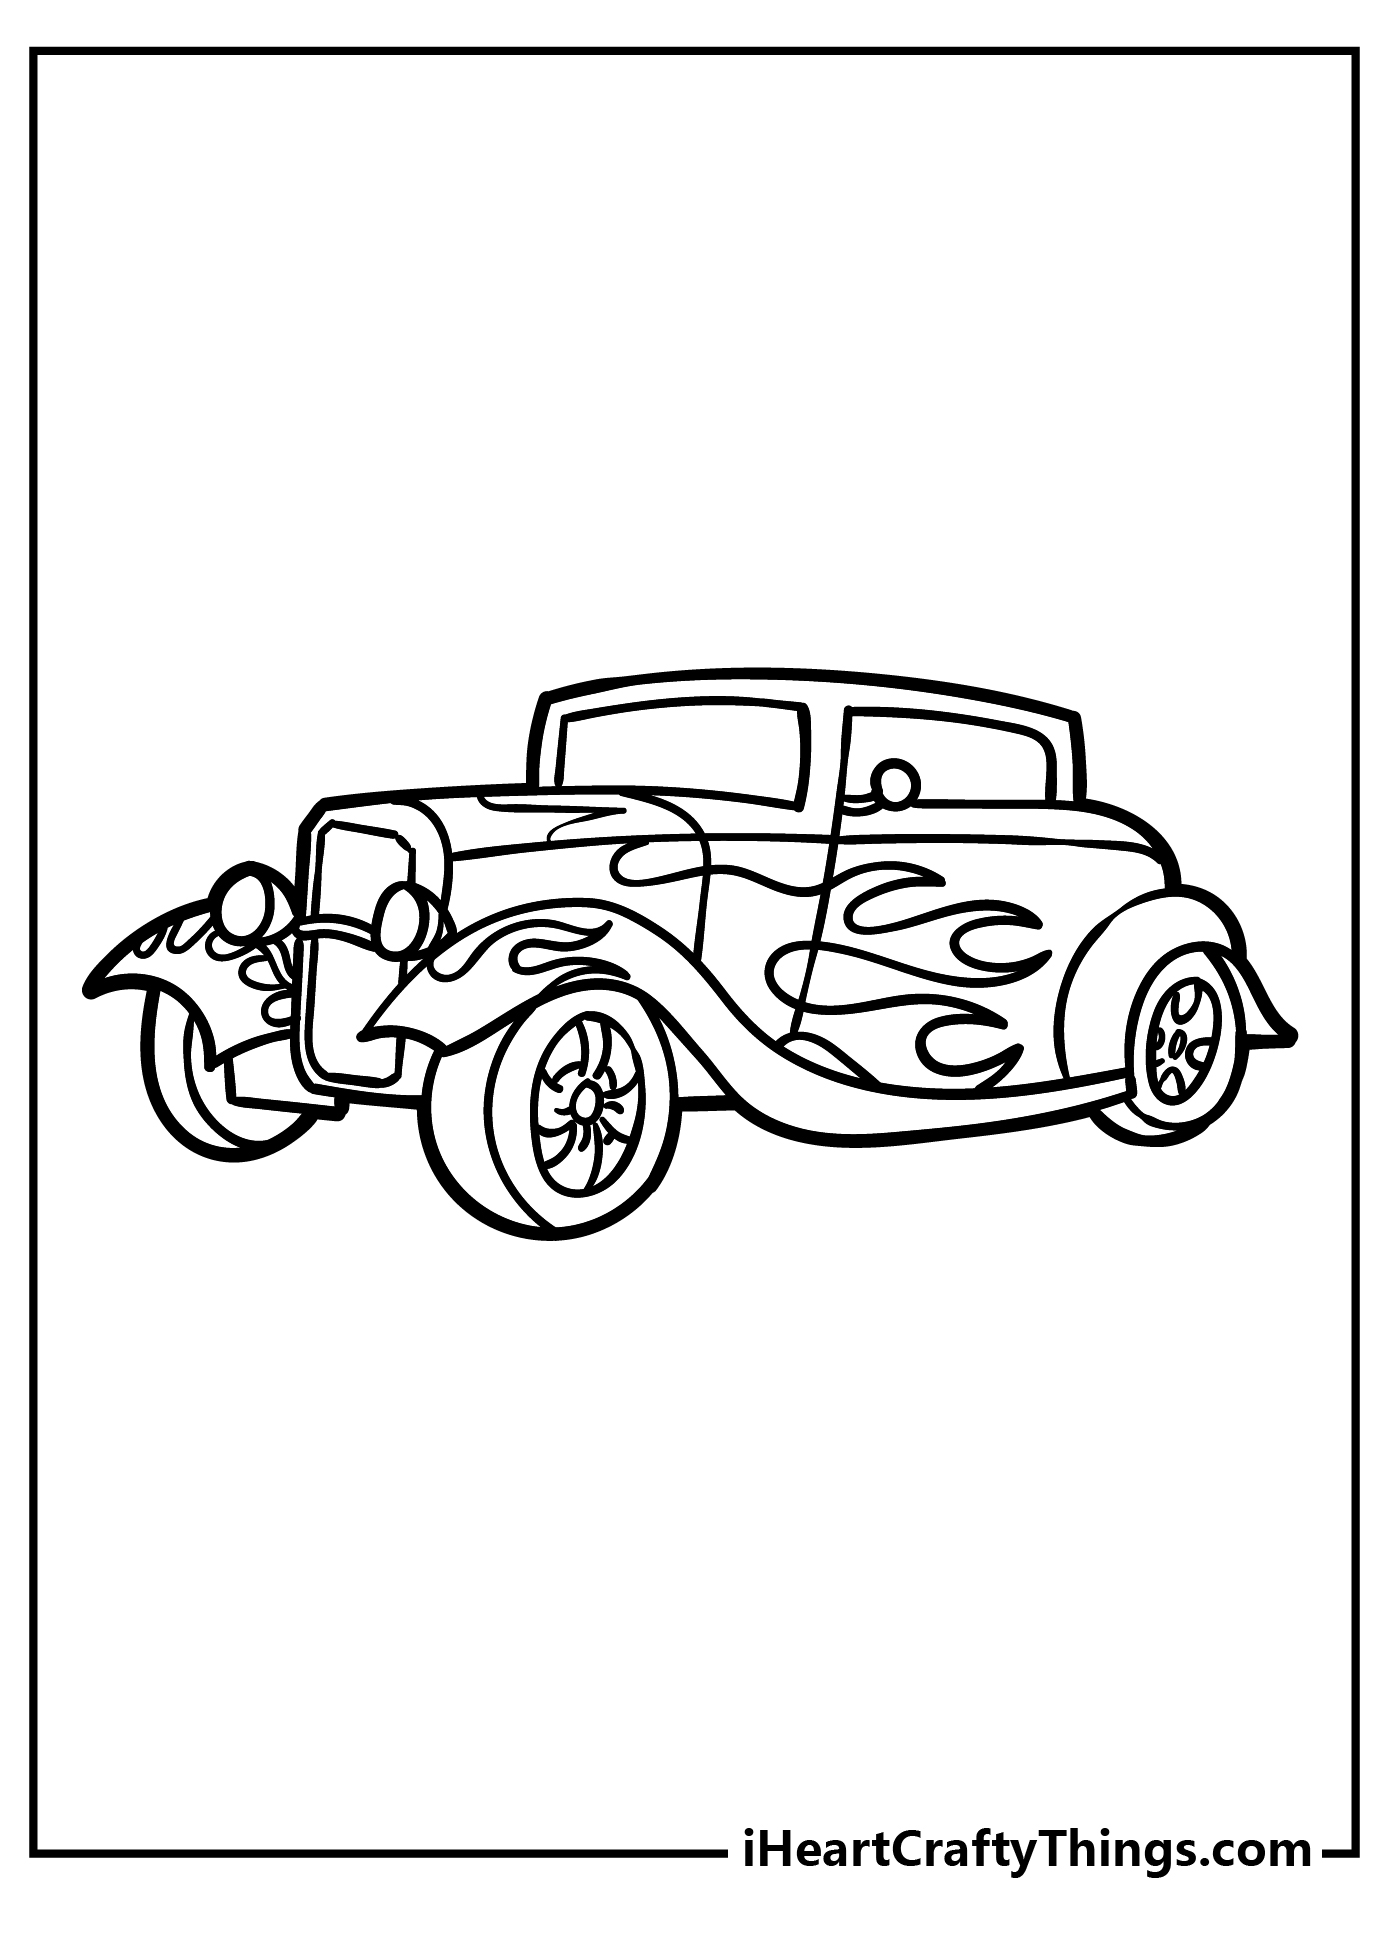 Hot Rod Coloring Pages for kids free download